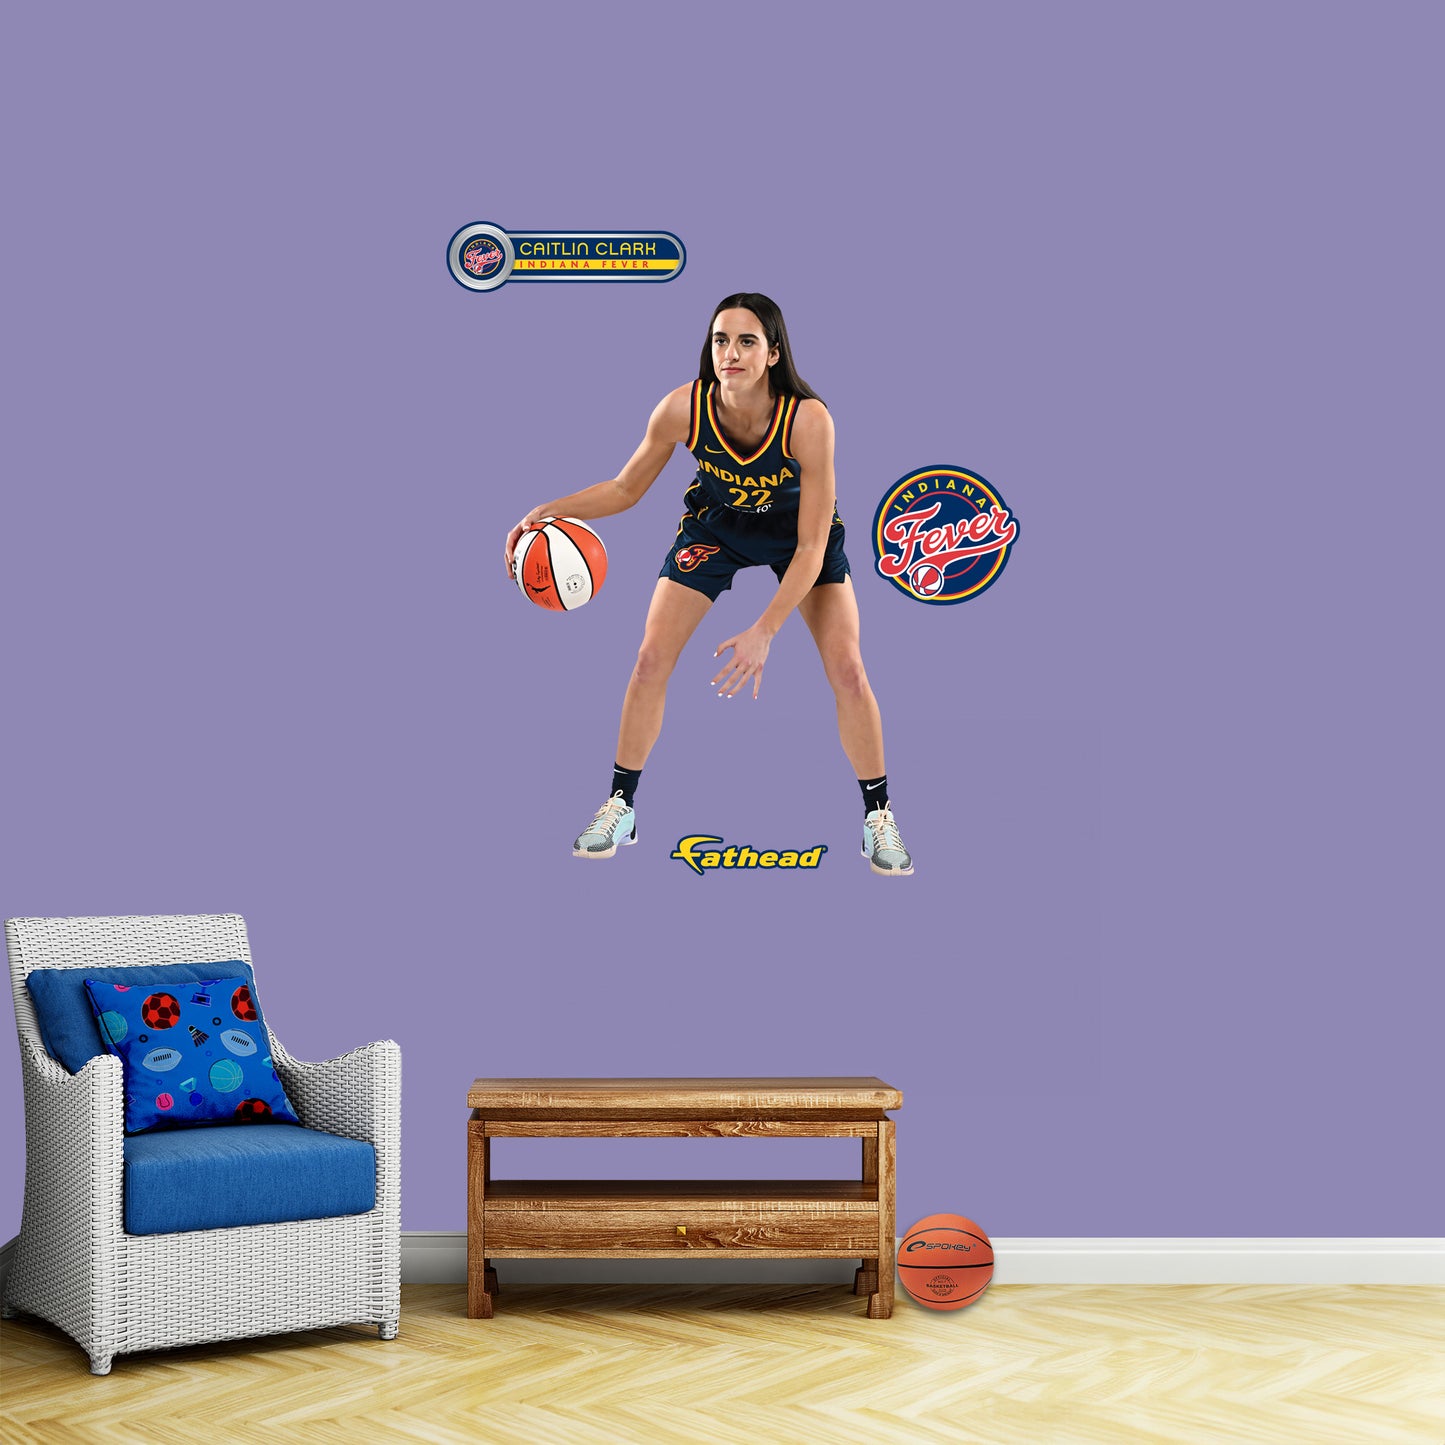 Indiana Fever: Caitlin Clark         - Officially Licensed WNBA Removable     Adhesive Decal